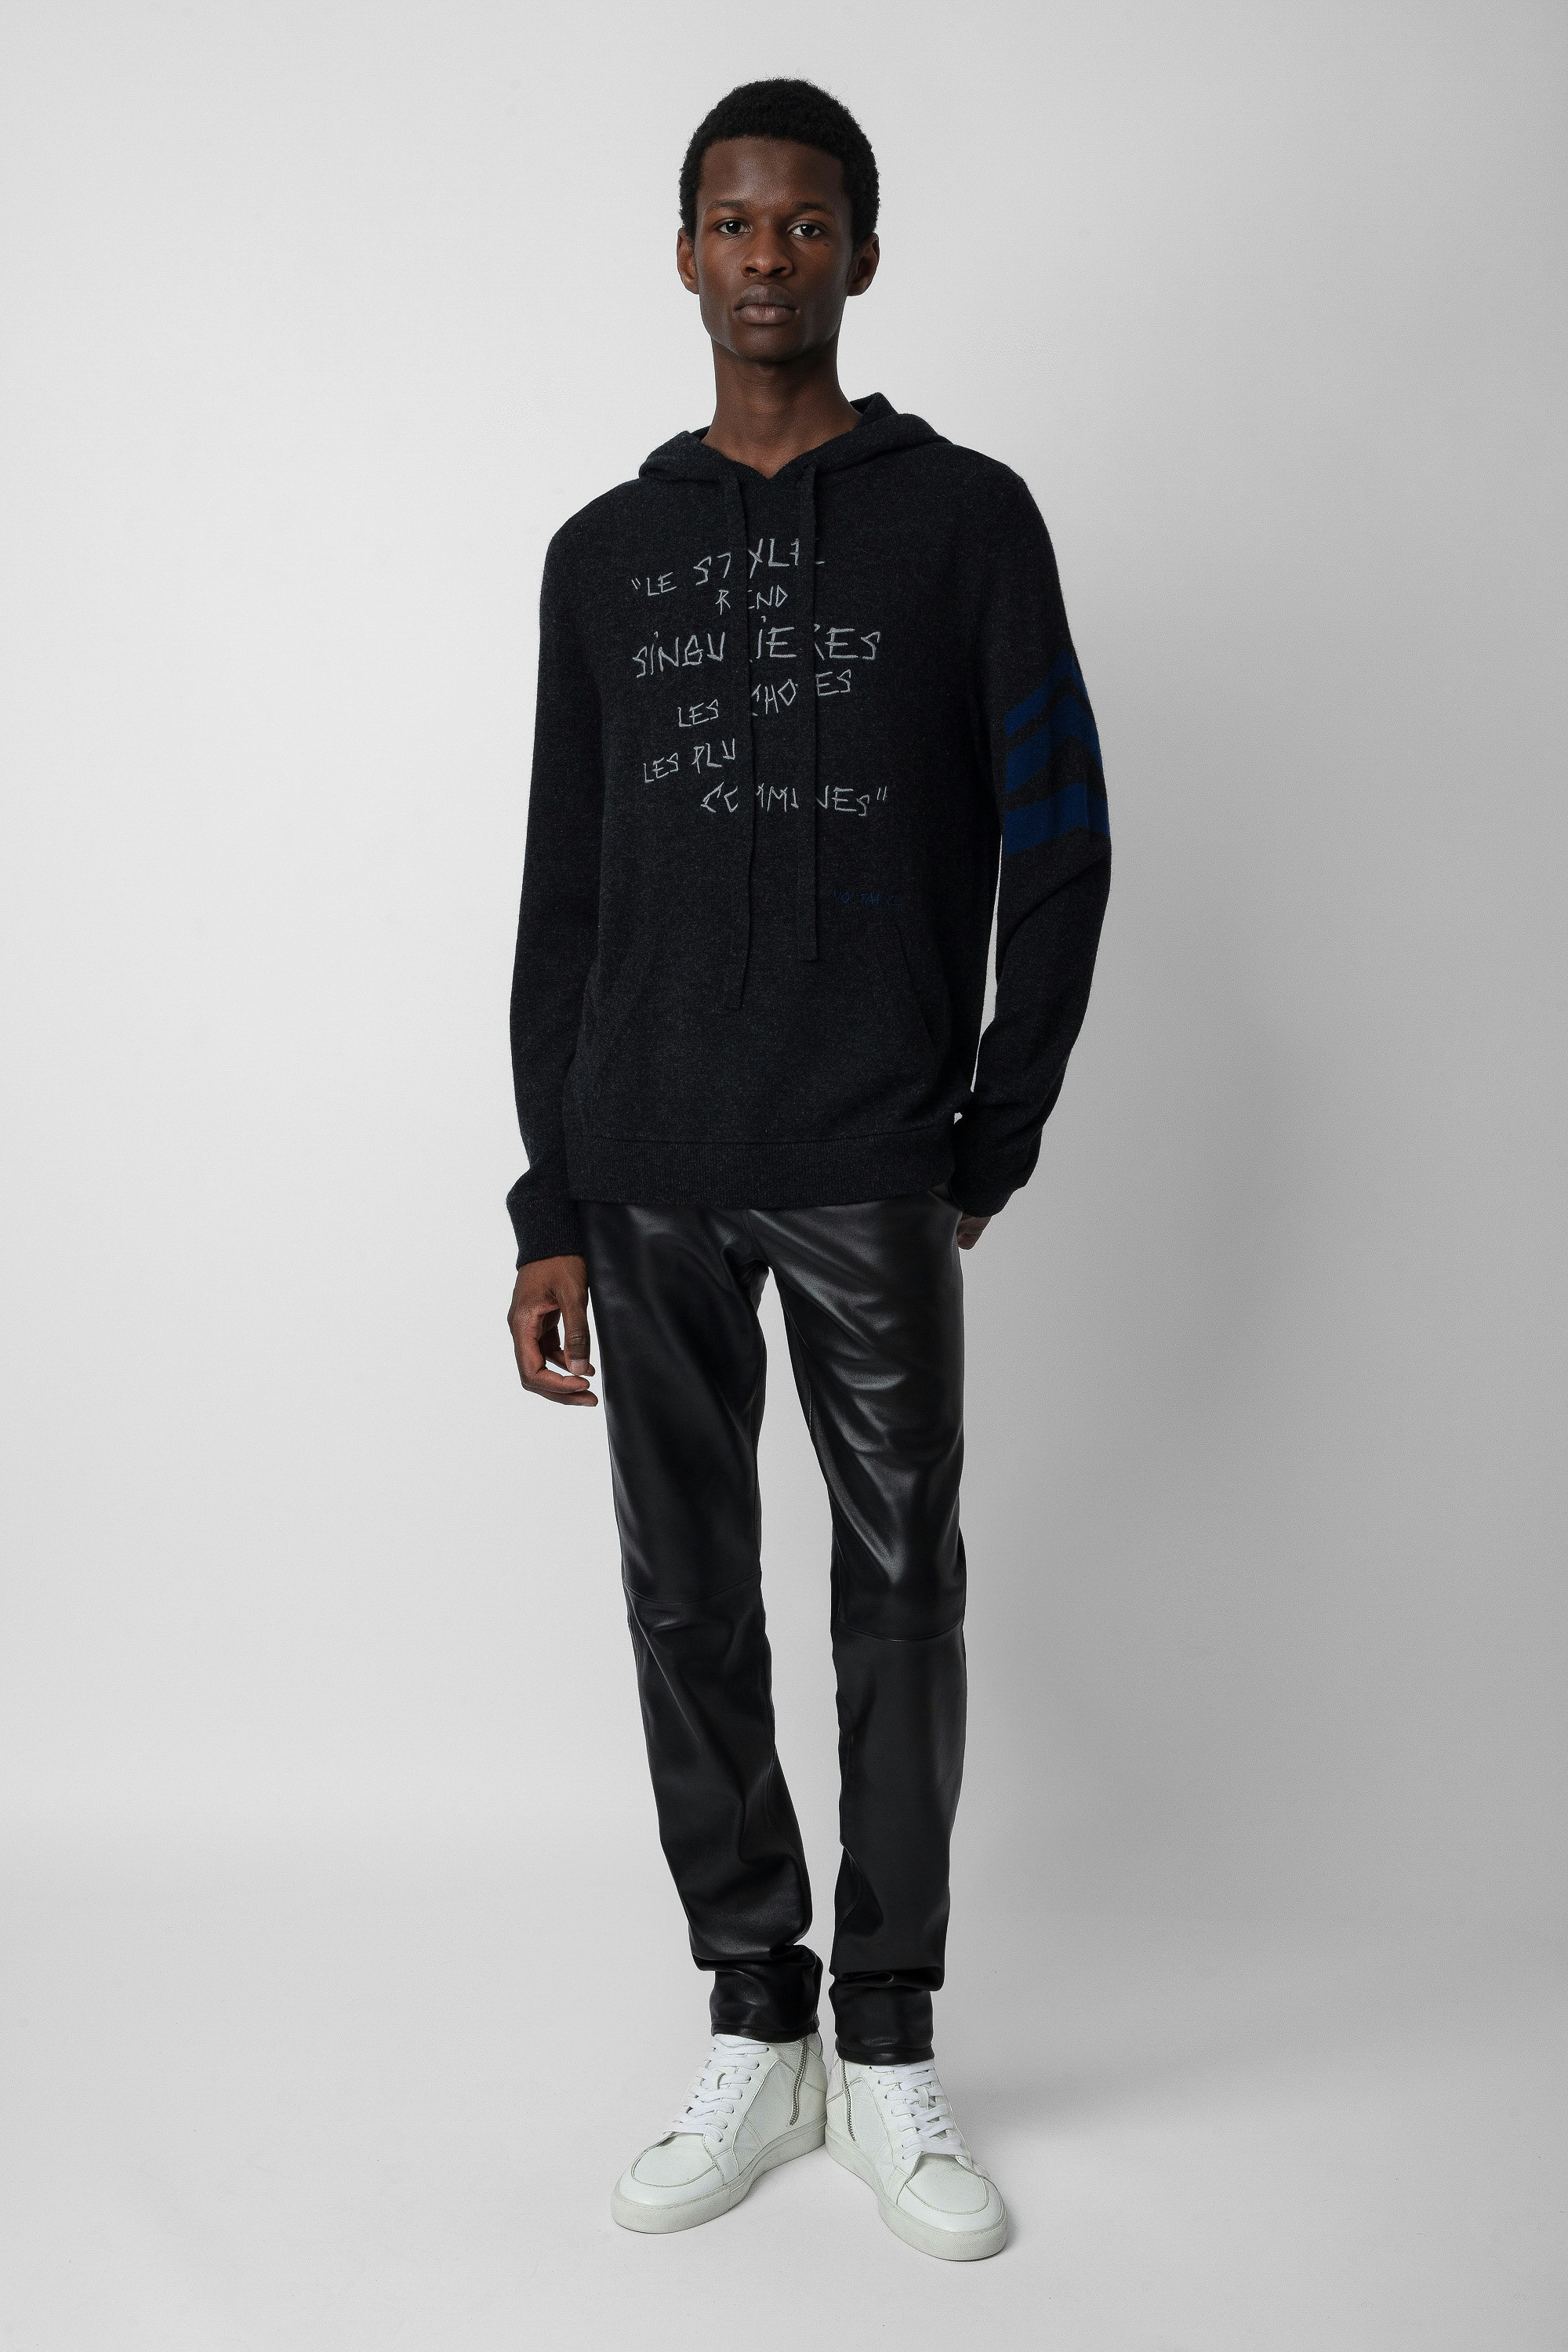 Clay Jumper - Anthracite grey knit hooded sweater with arrows on the sleeve and the slogan “Le style rend singulières les choses les plus communes”.